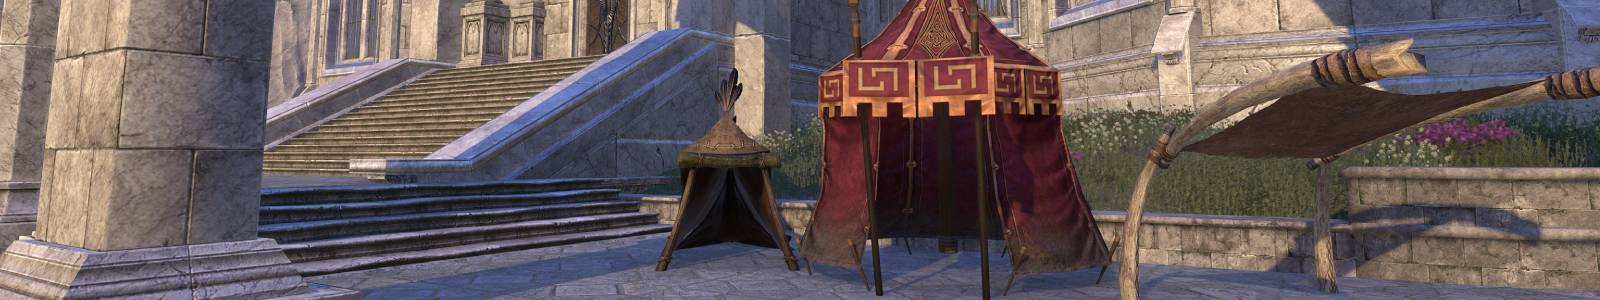 Redguard Tent, Rounded Blue - ESO header